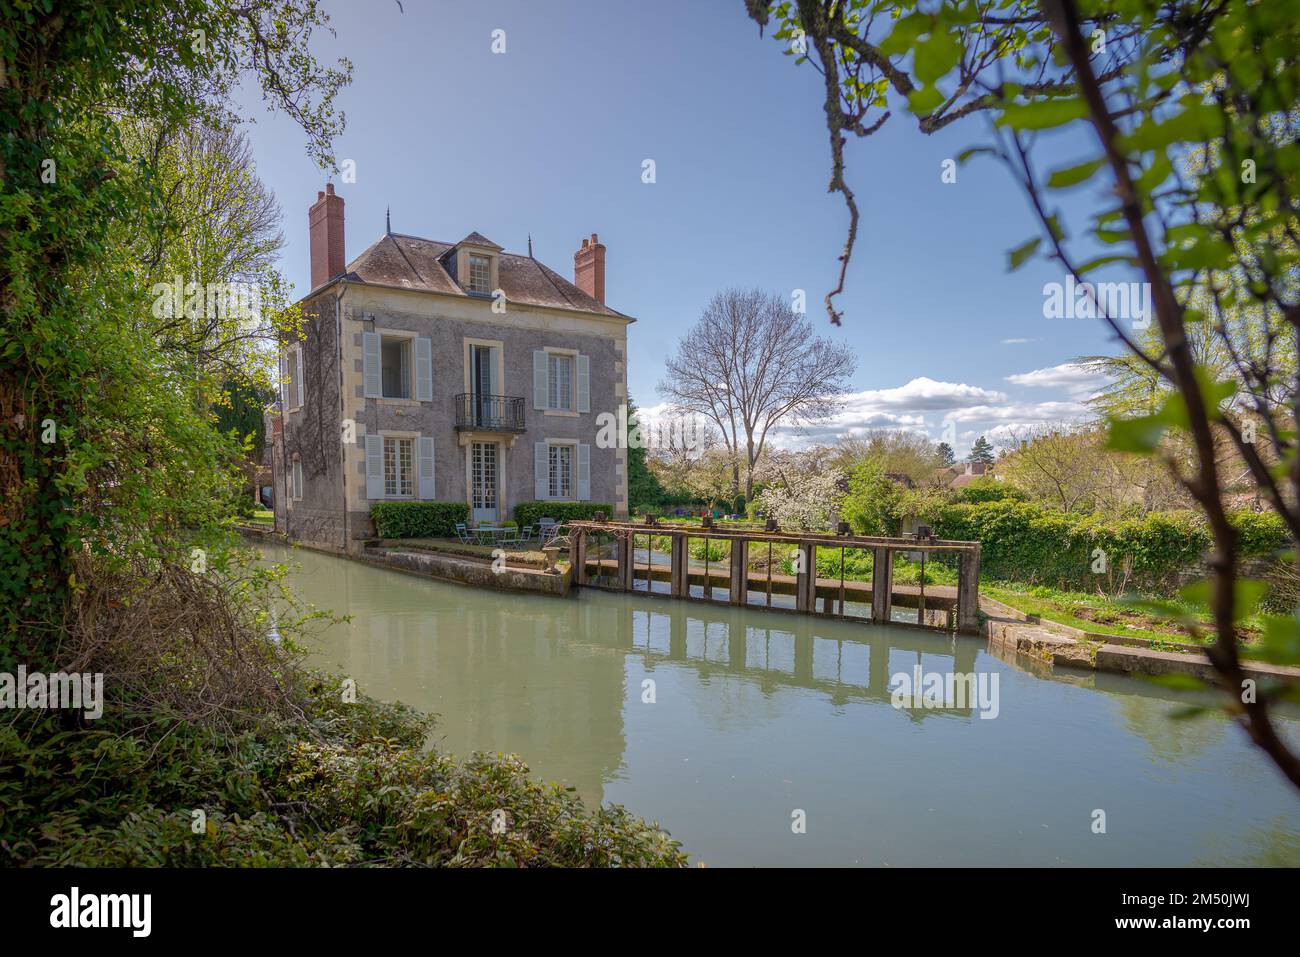 The lock keeper's house set along a canal and taken on a sunny spring day in Donzy, Burgundy, France Stock Photo